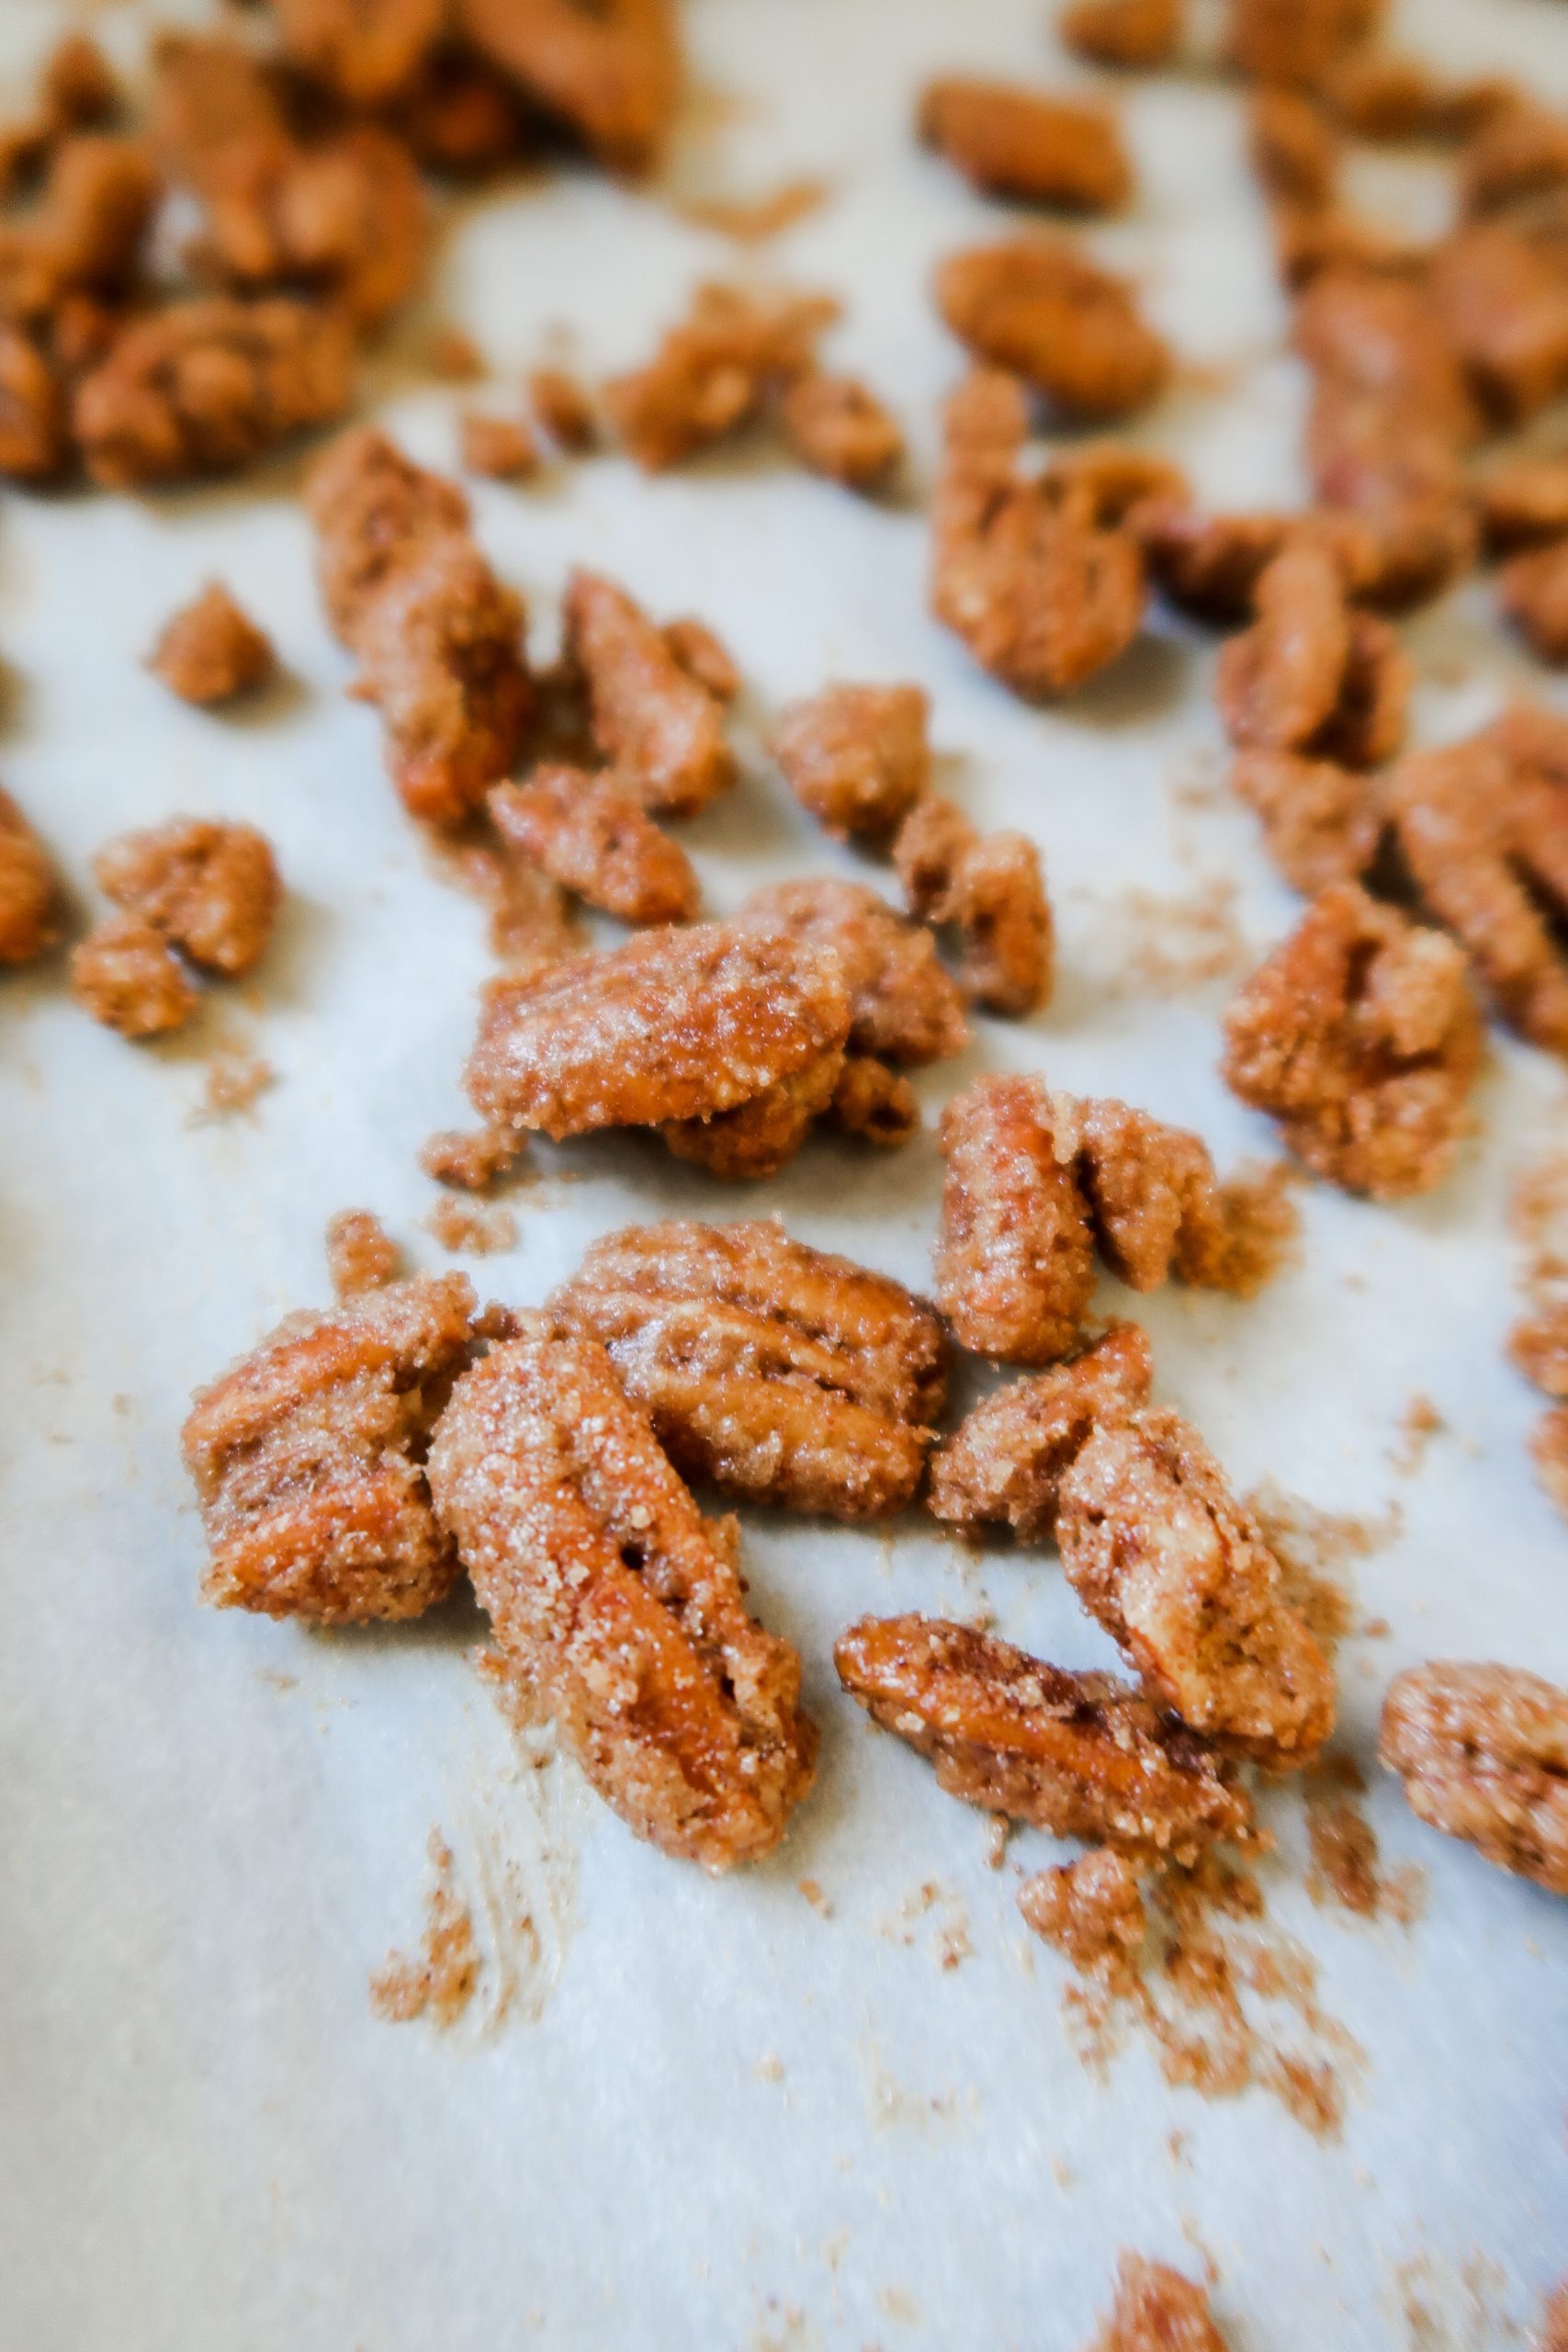 Candied Pecan Recipe